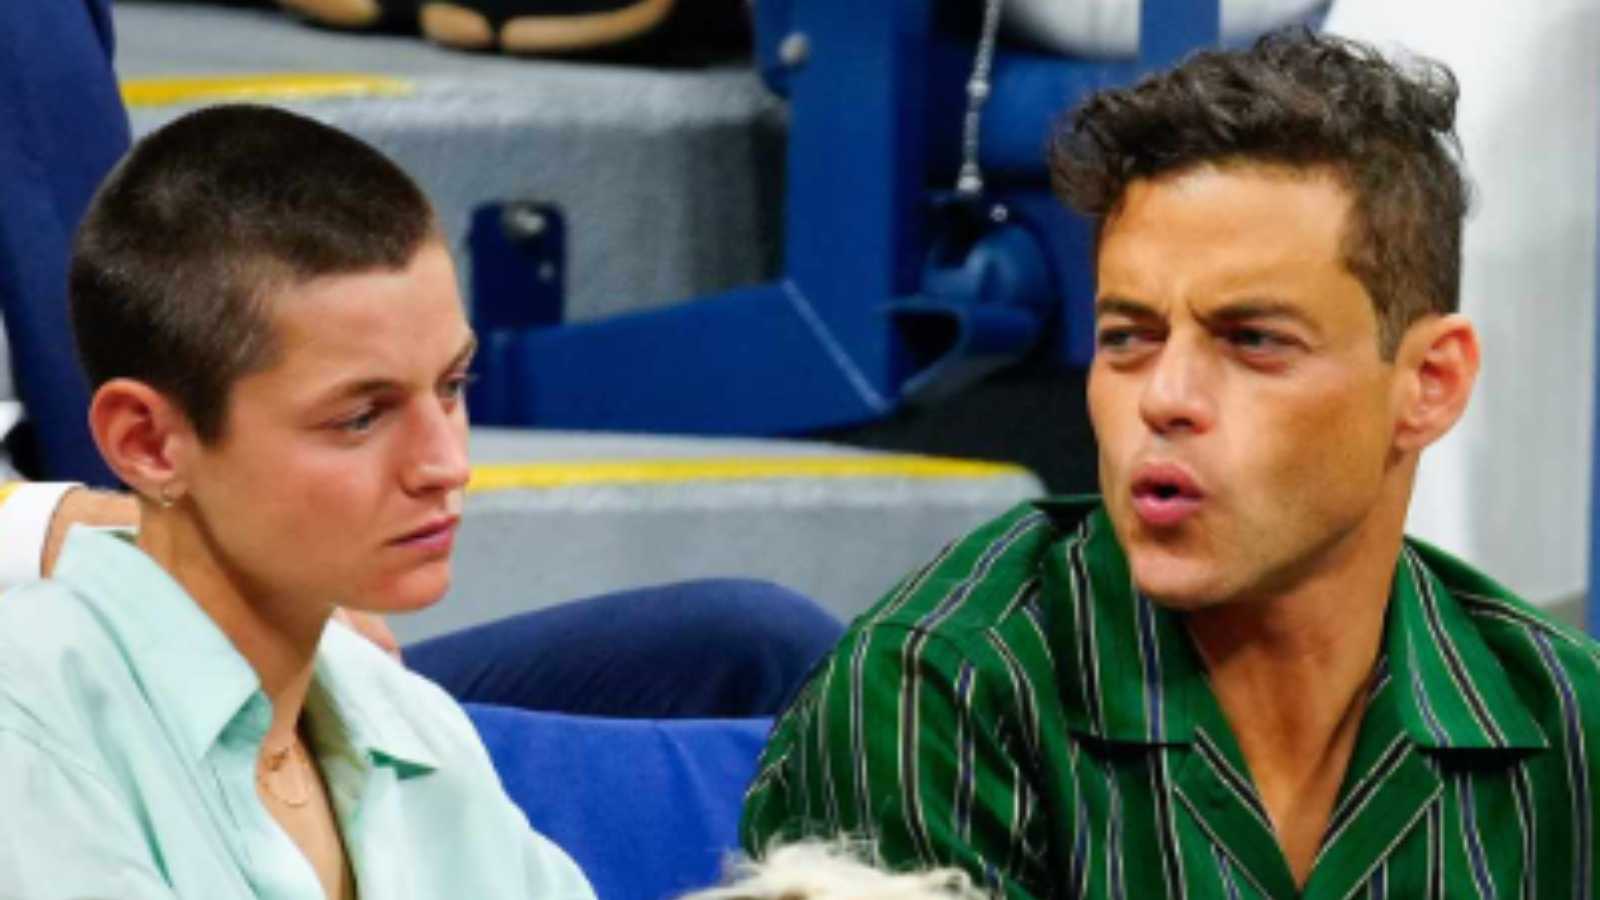 Rami Malek and Emma Corin confirm their relationship with a passionate kiss and a romantic stroll